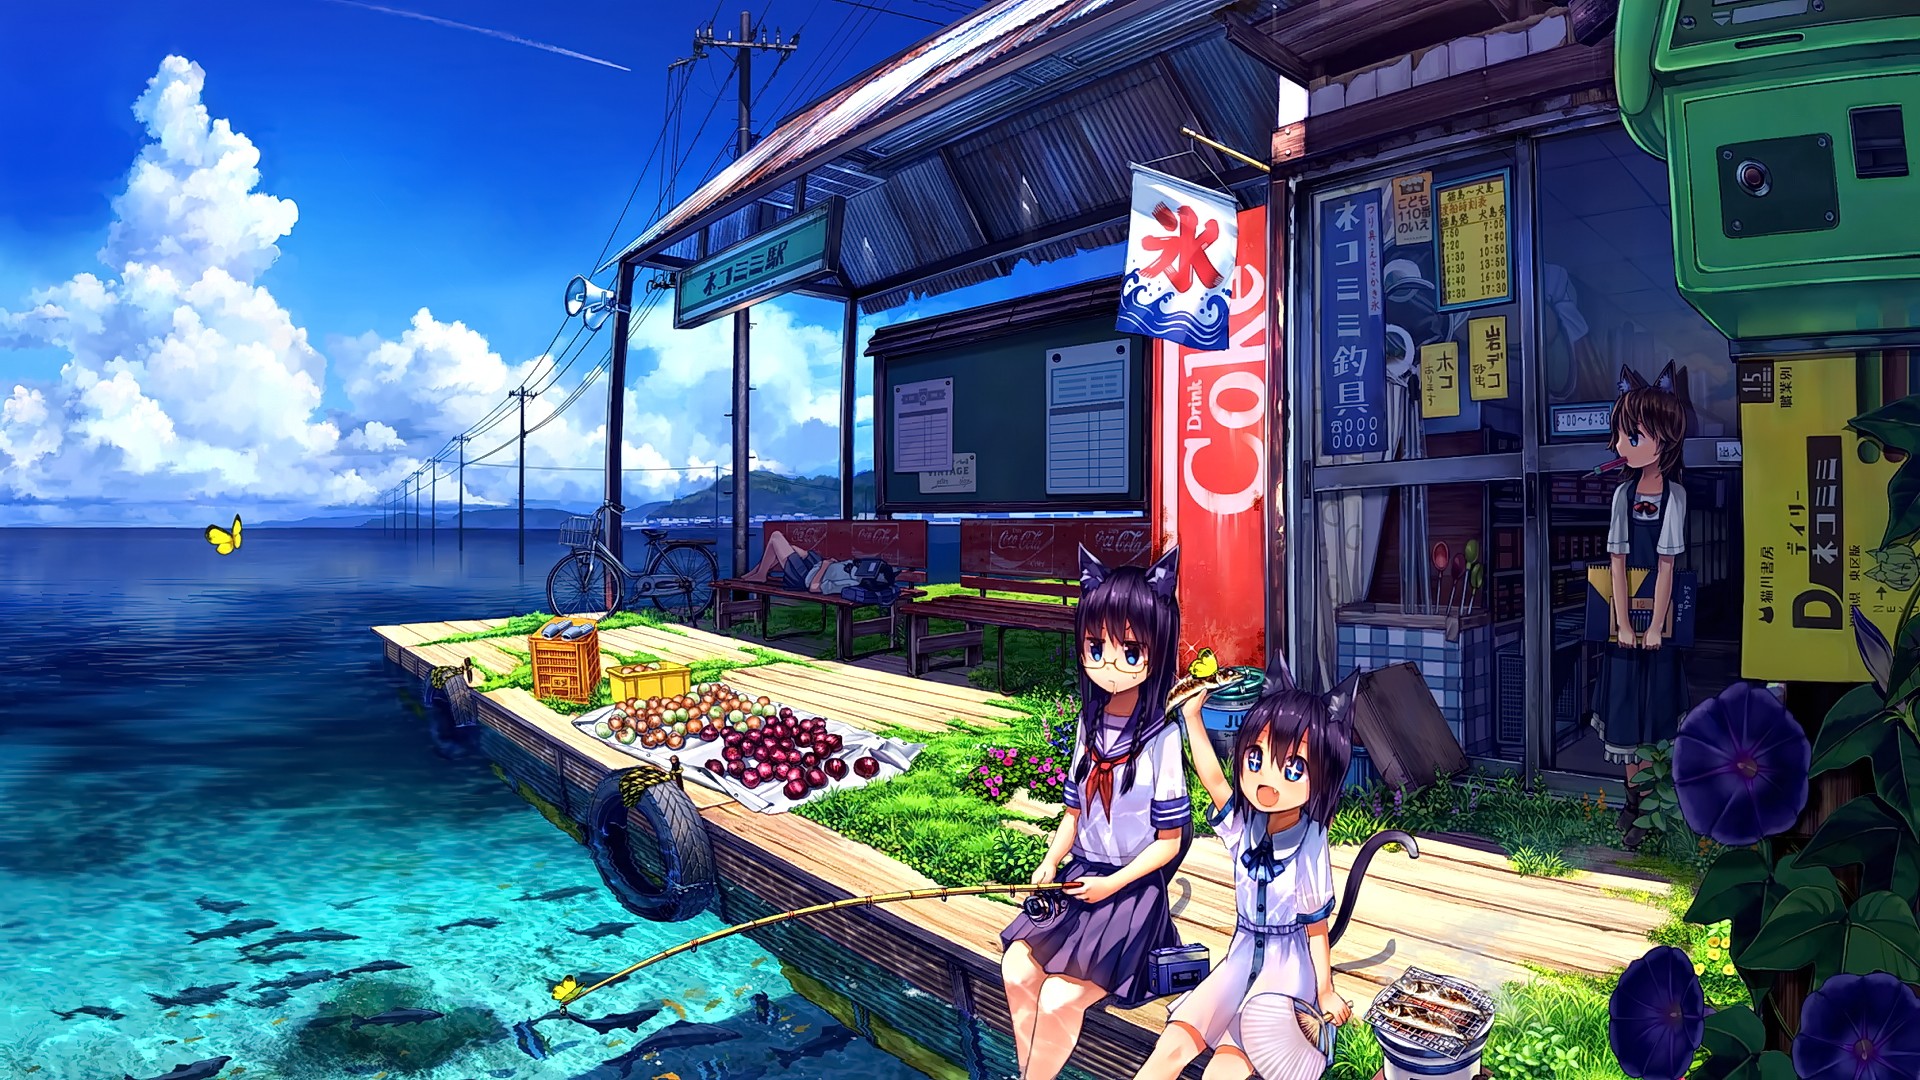 Anime 1920x1080 anime anime girls brunette blue eyes sitting animal ears looking away animals fish fishing glasses butterfly flowers sky water clouds mountains bicycle